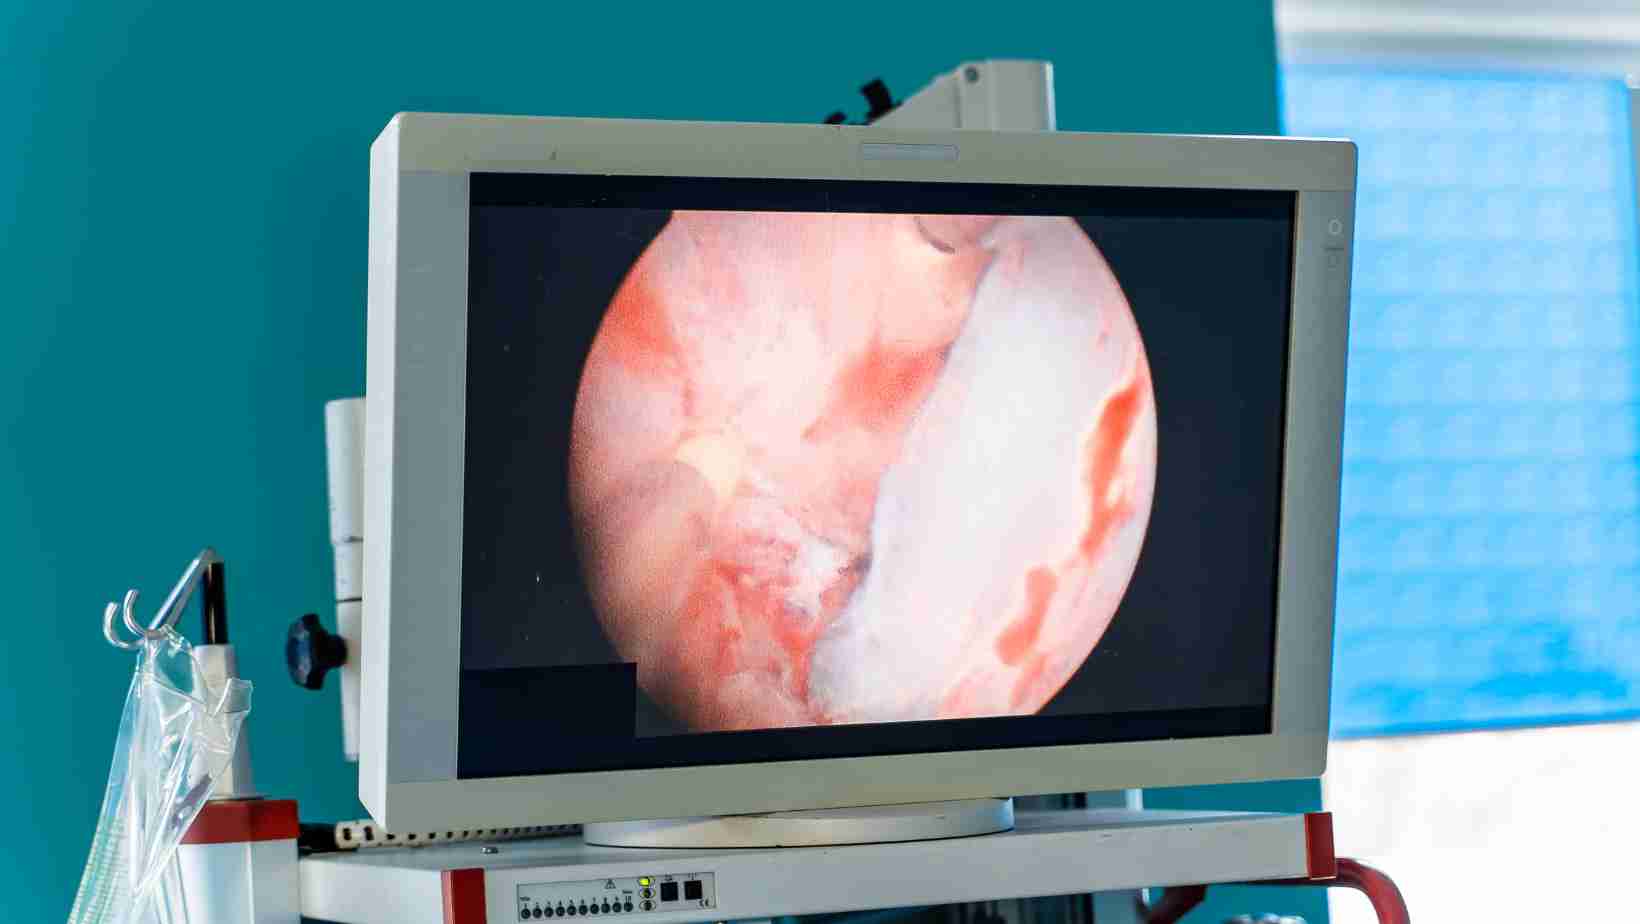 Use of endoscopes in surgery